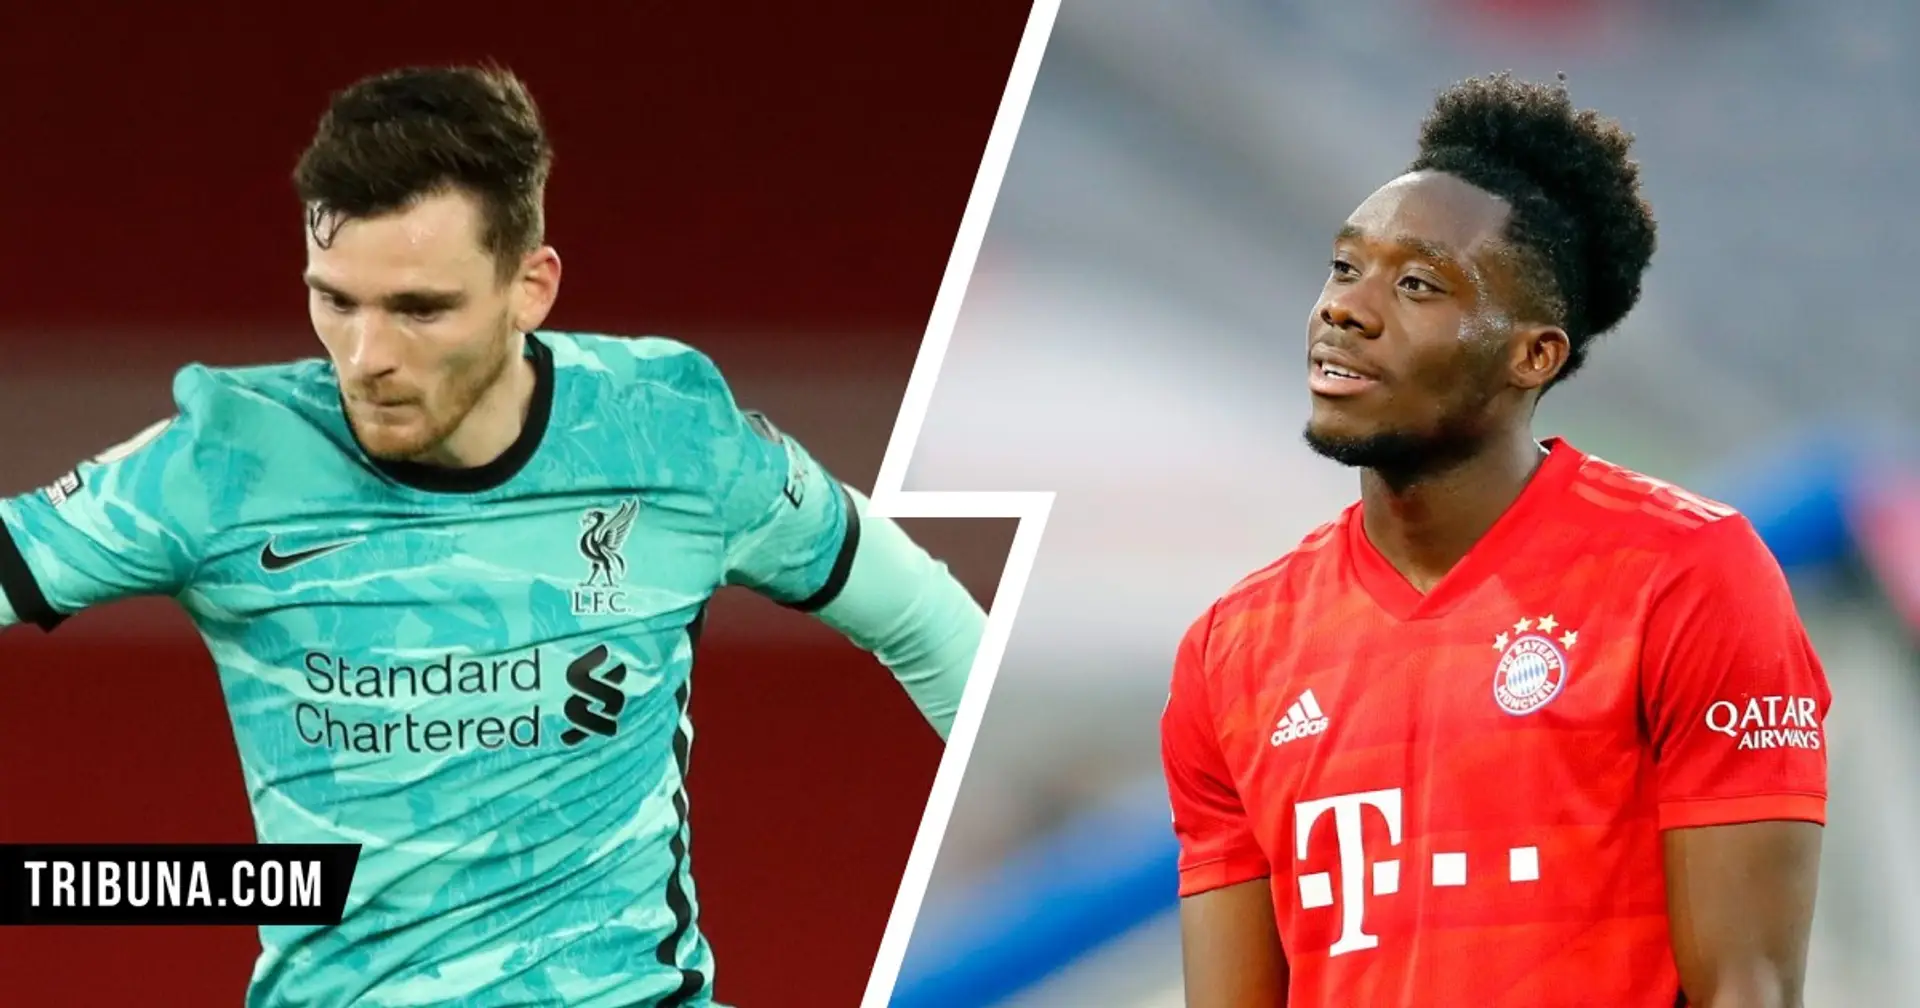 Jose Enrique provides 2 reasons why Robertson is better than Bayern's Alphonso Davies